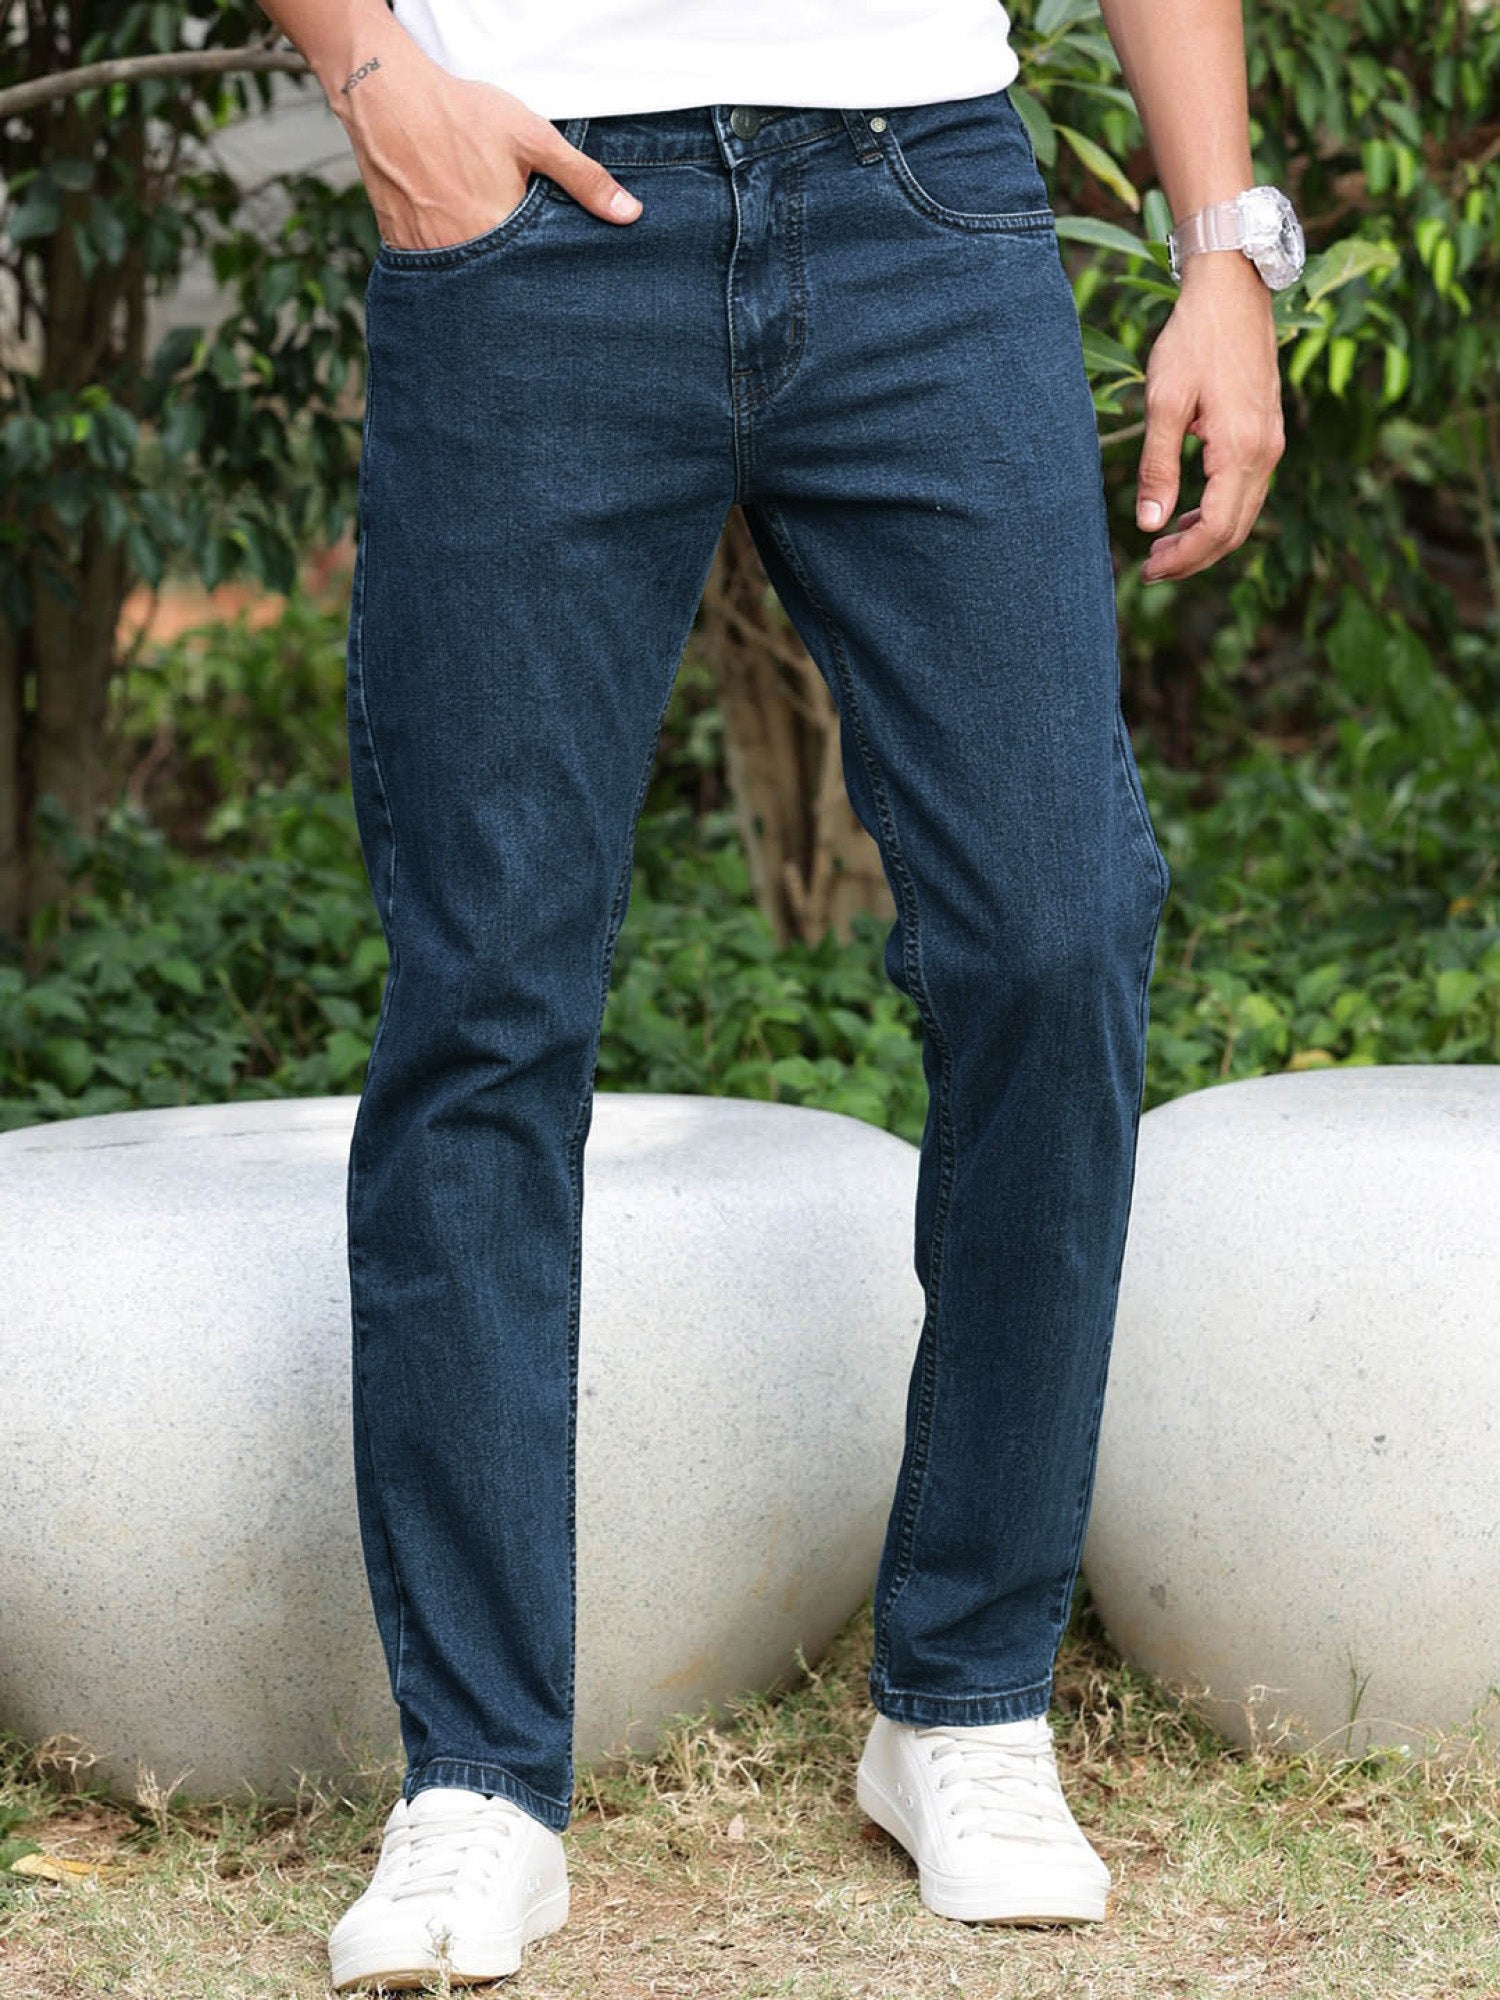 NXT Straight Fit Jeans For Men-Dark Blue-SP2656/RT2531